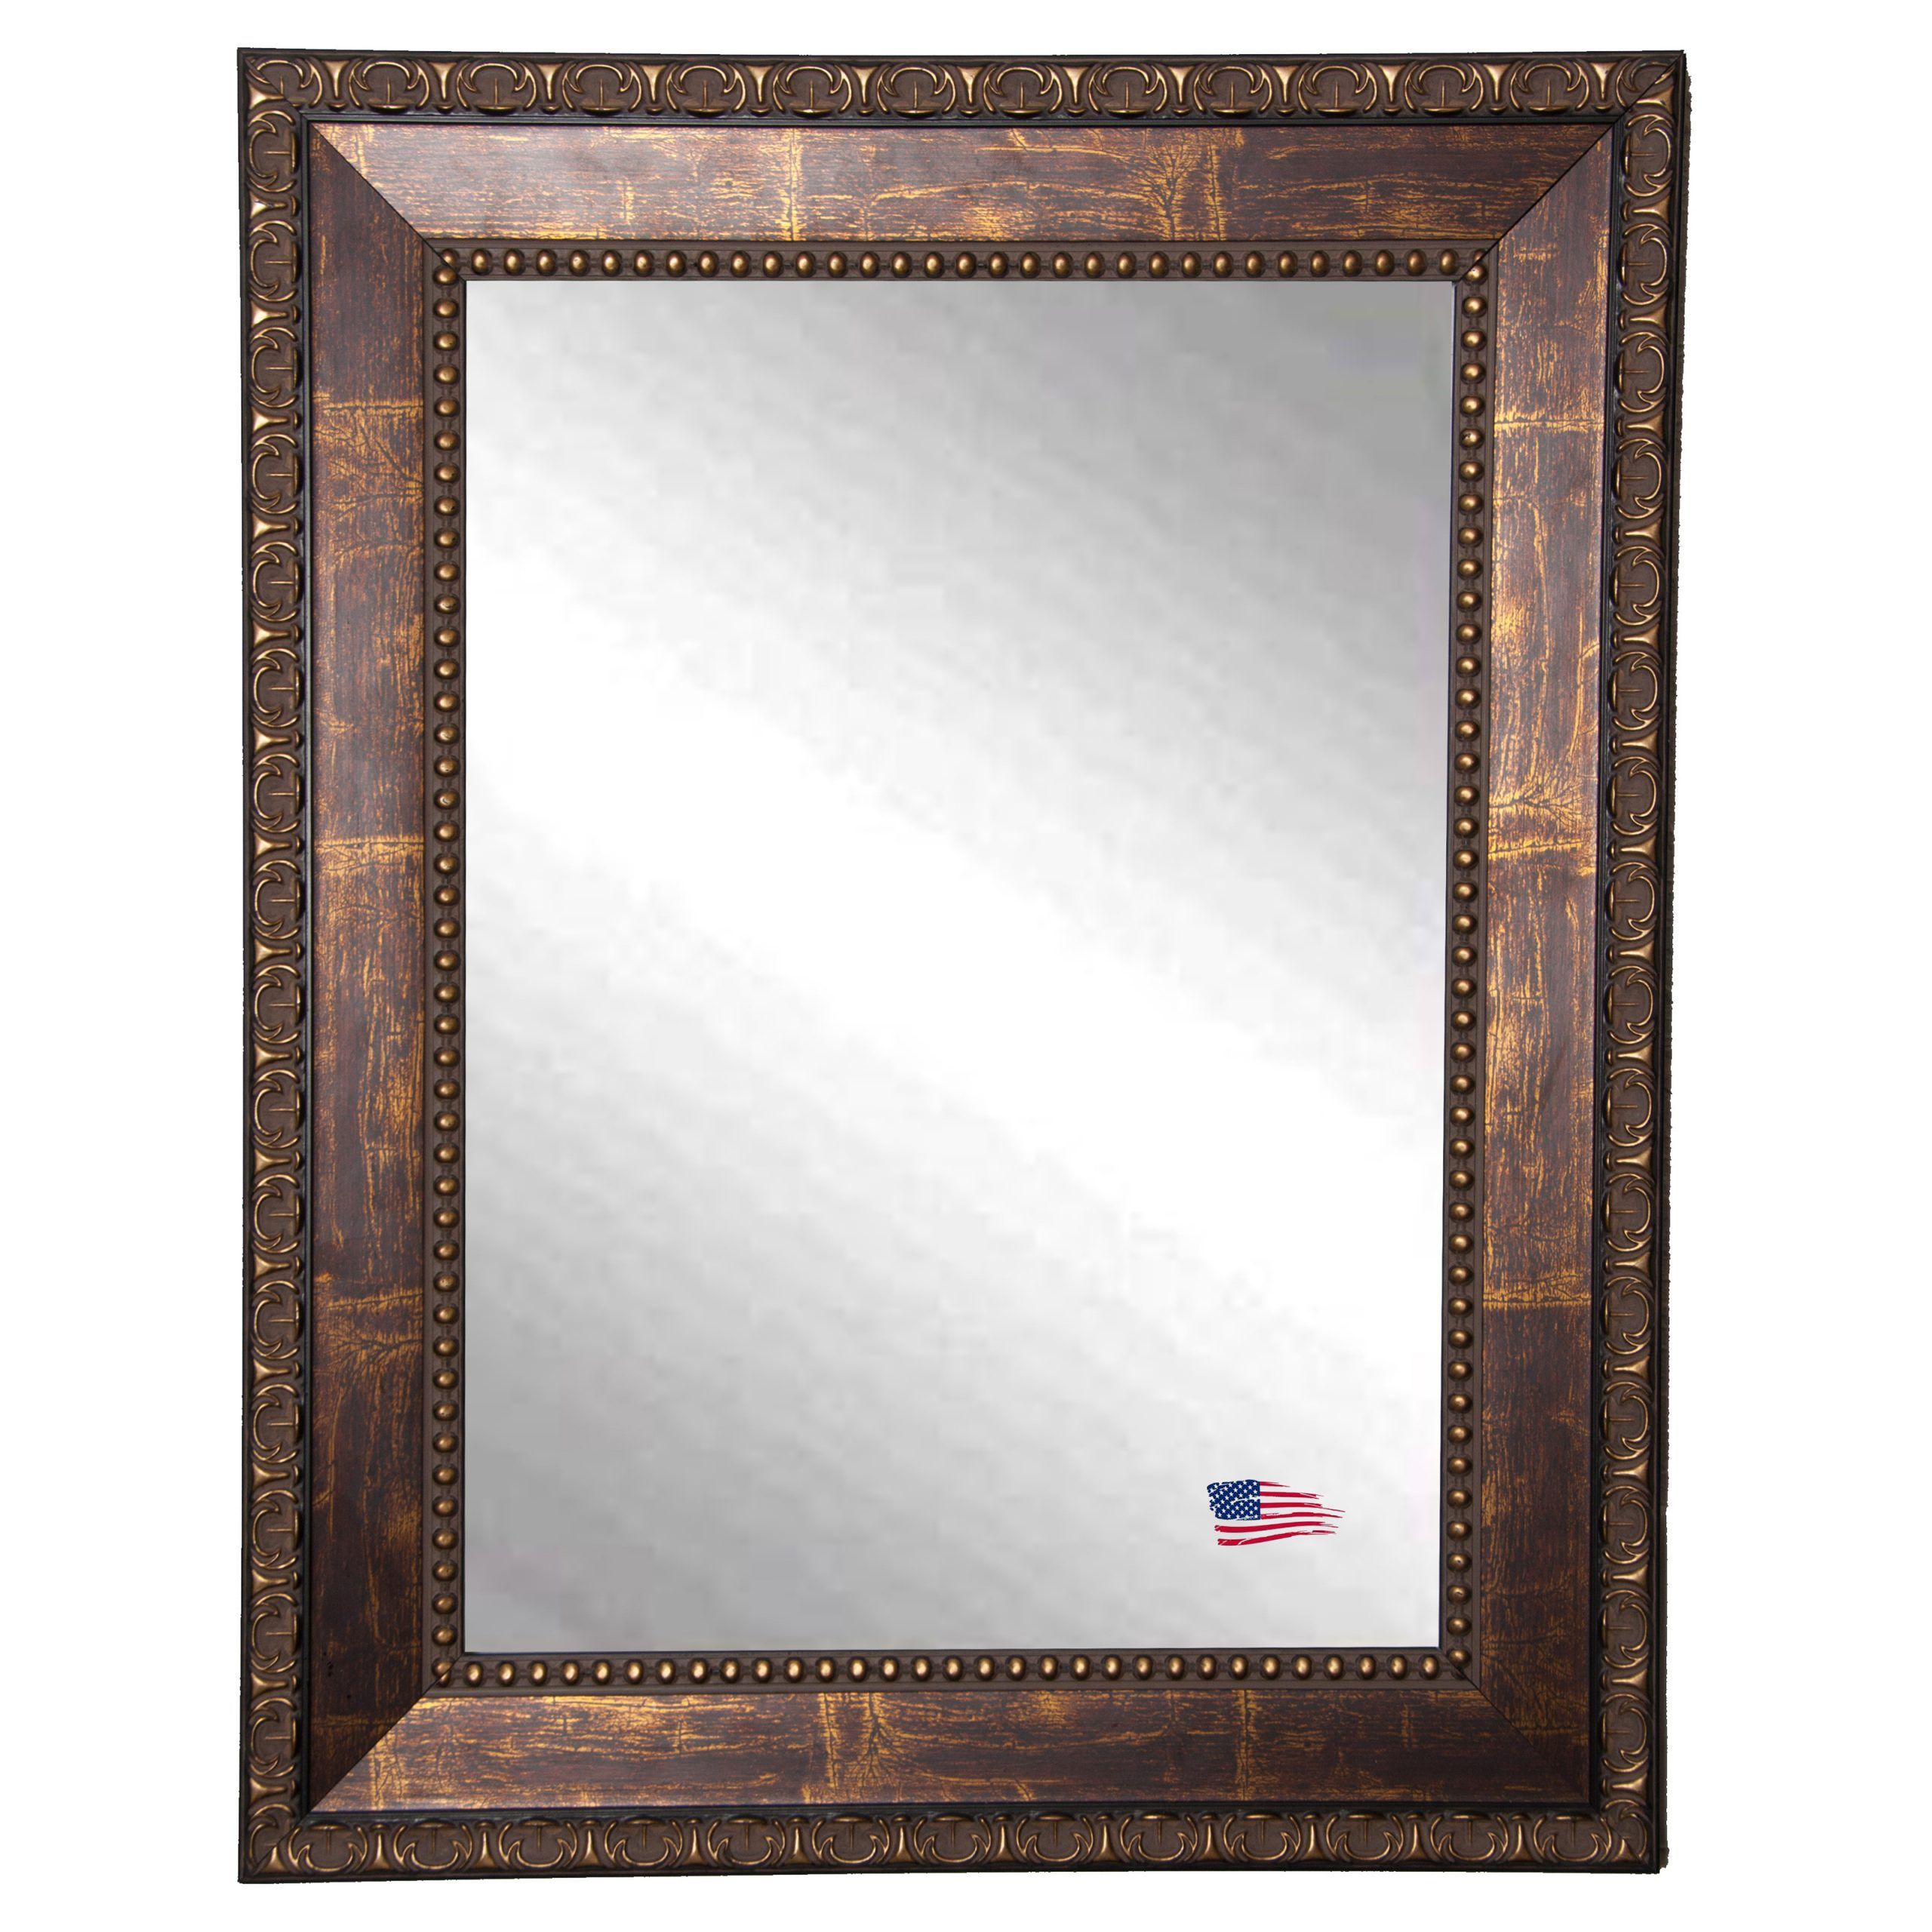 Rayne Mirrors Traditional Copper Bronze Wall Mirror – Mirrors At Hayneedle Intended For Woven Bronze Metal Wall Mirrors (View 11 of 15)